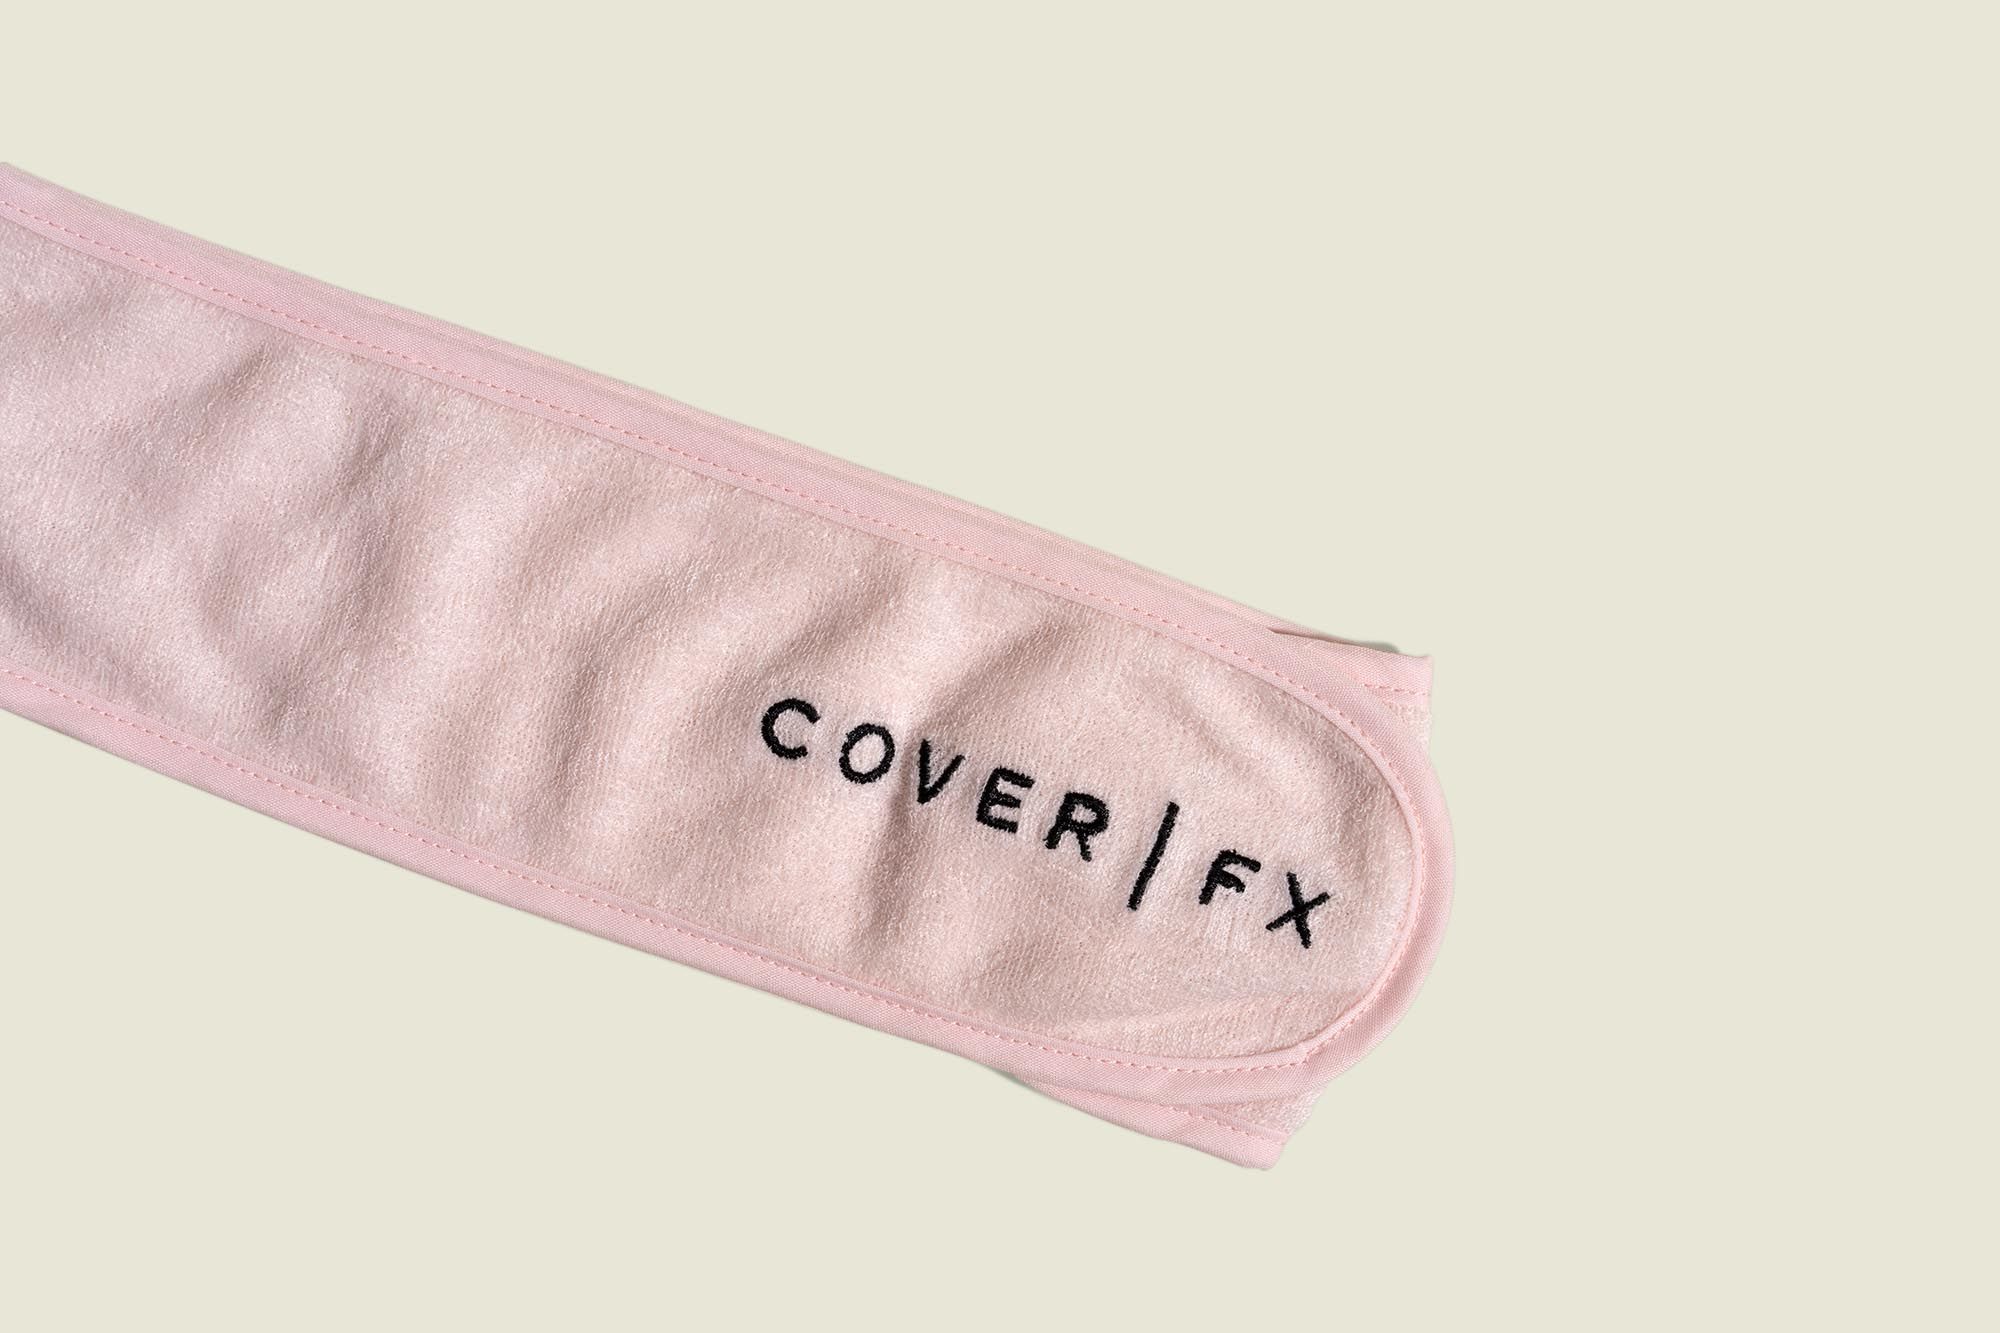 CoverFX